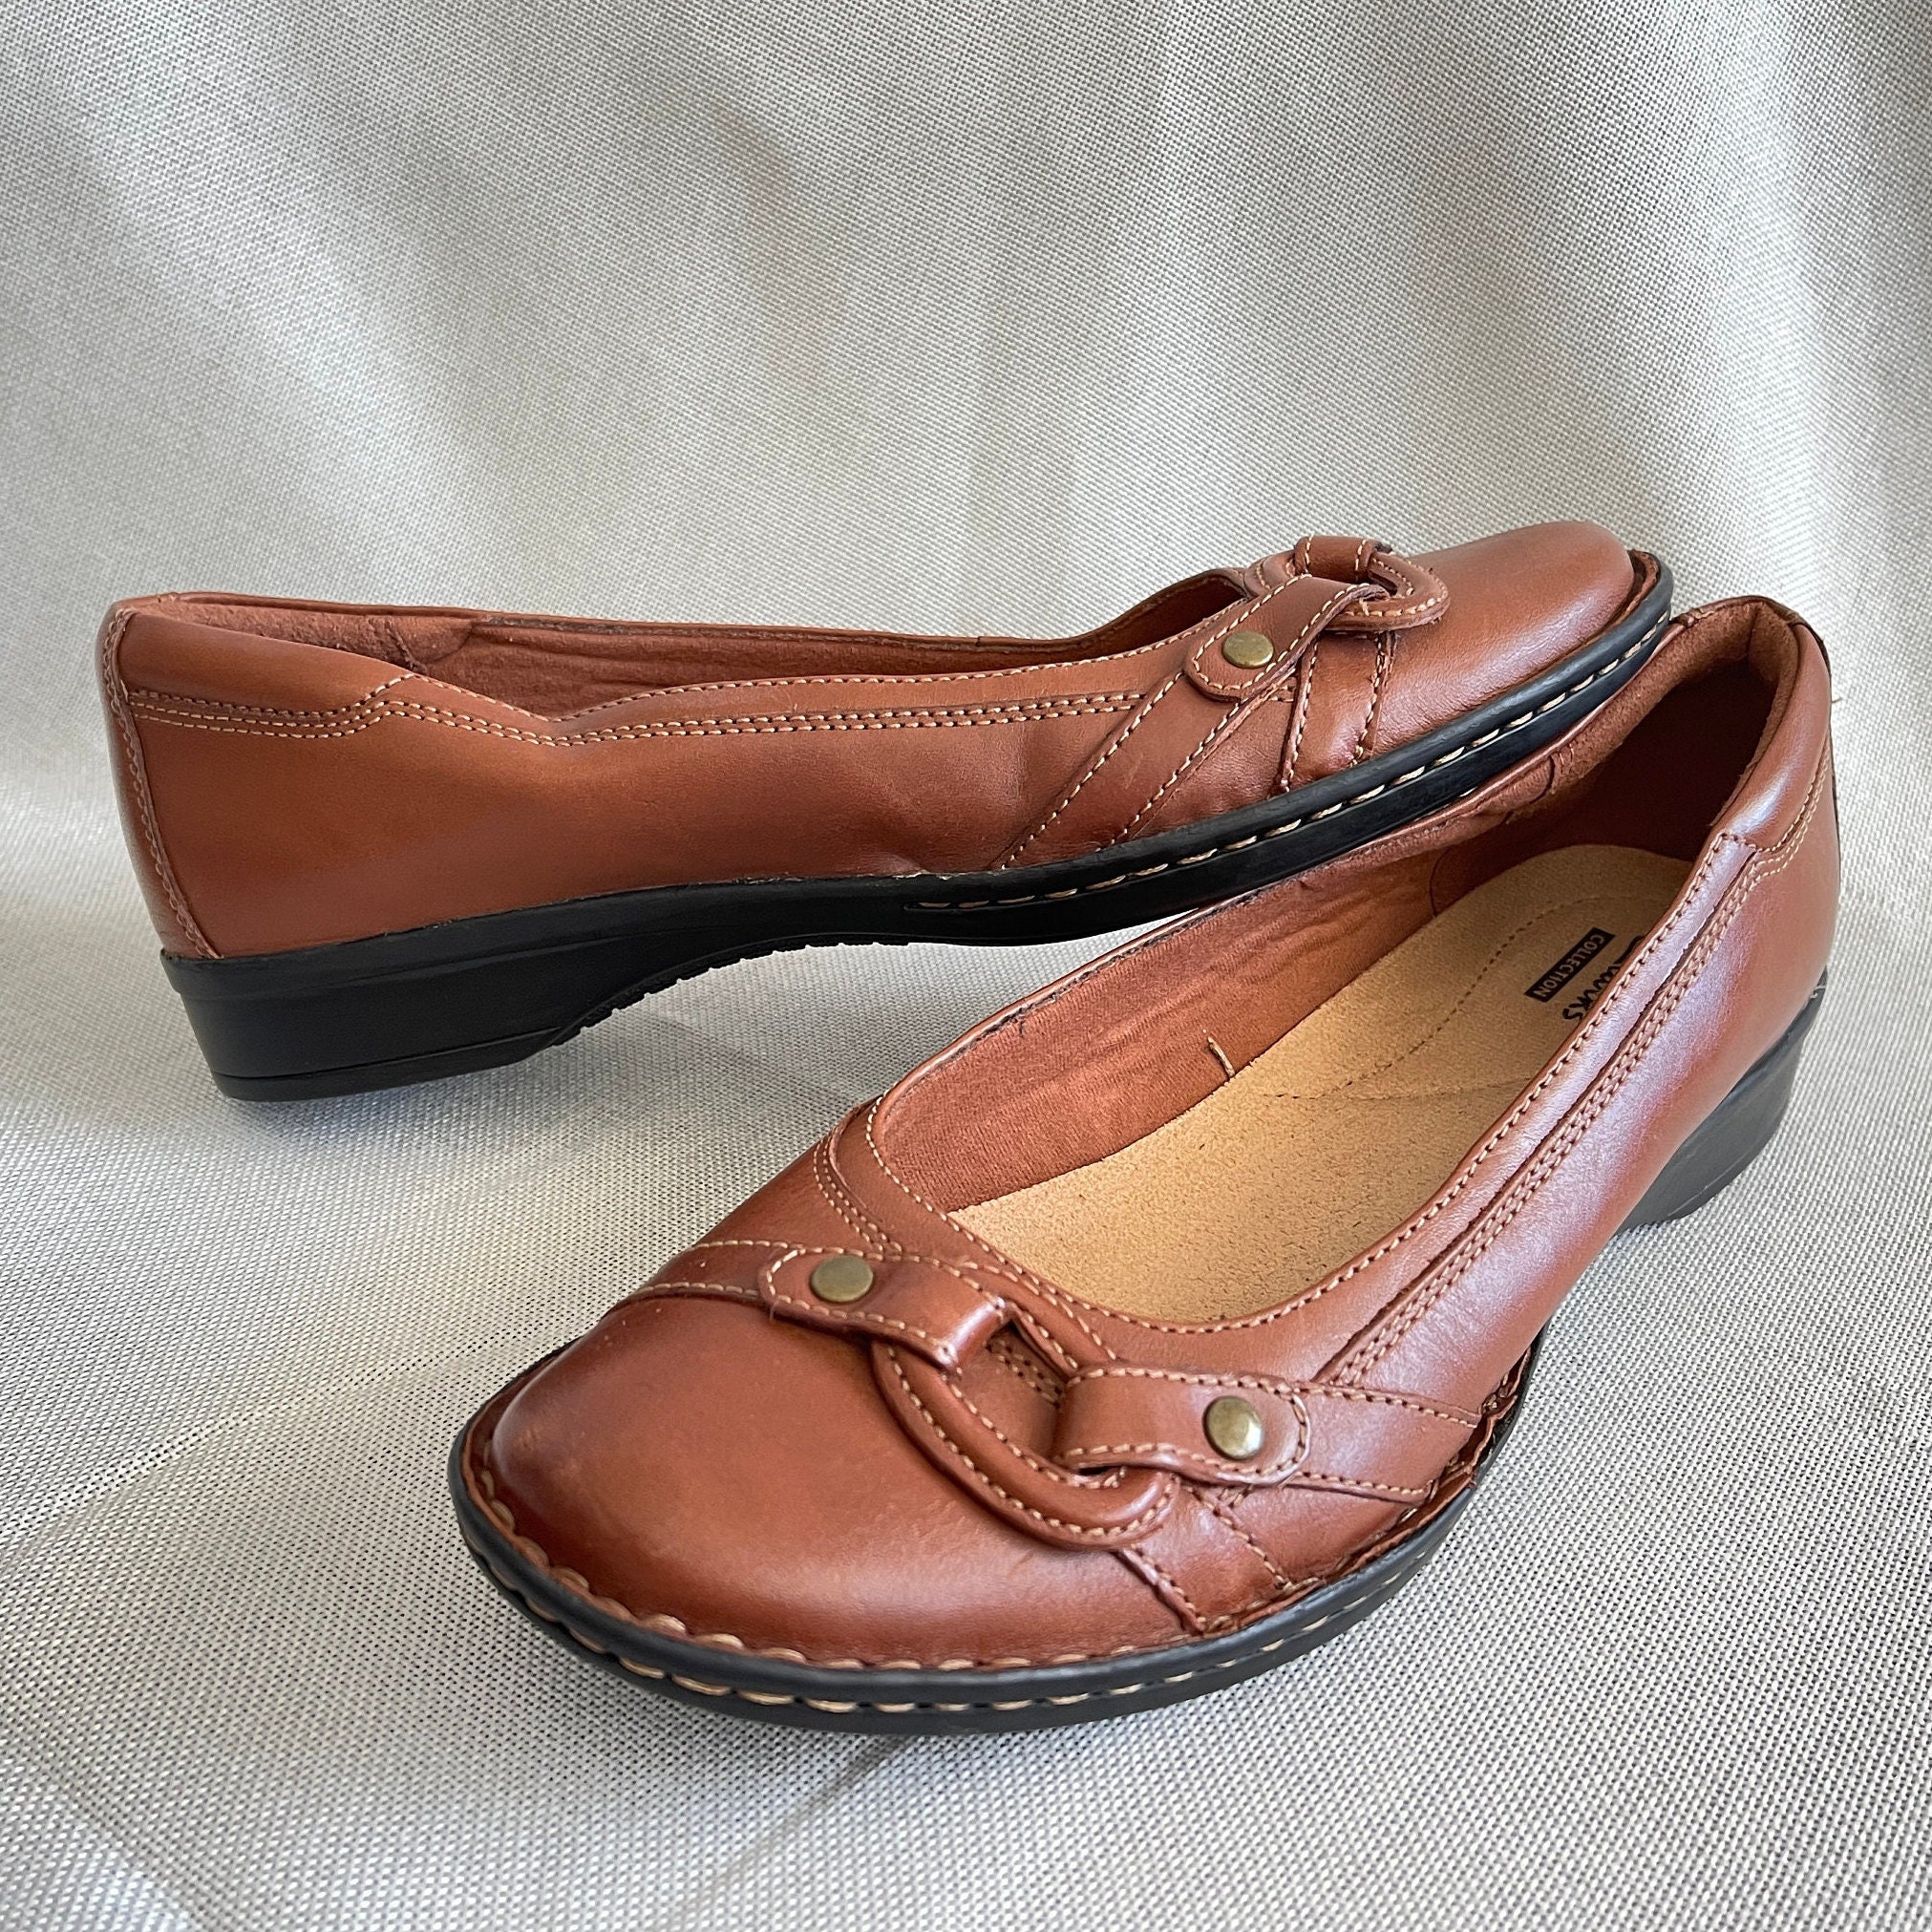 Buy Shoes Clarks Collection Leather Flats Brown Women's Online in India - Etsy